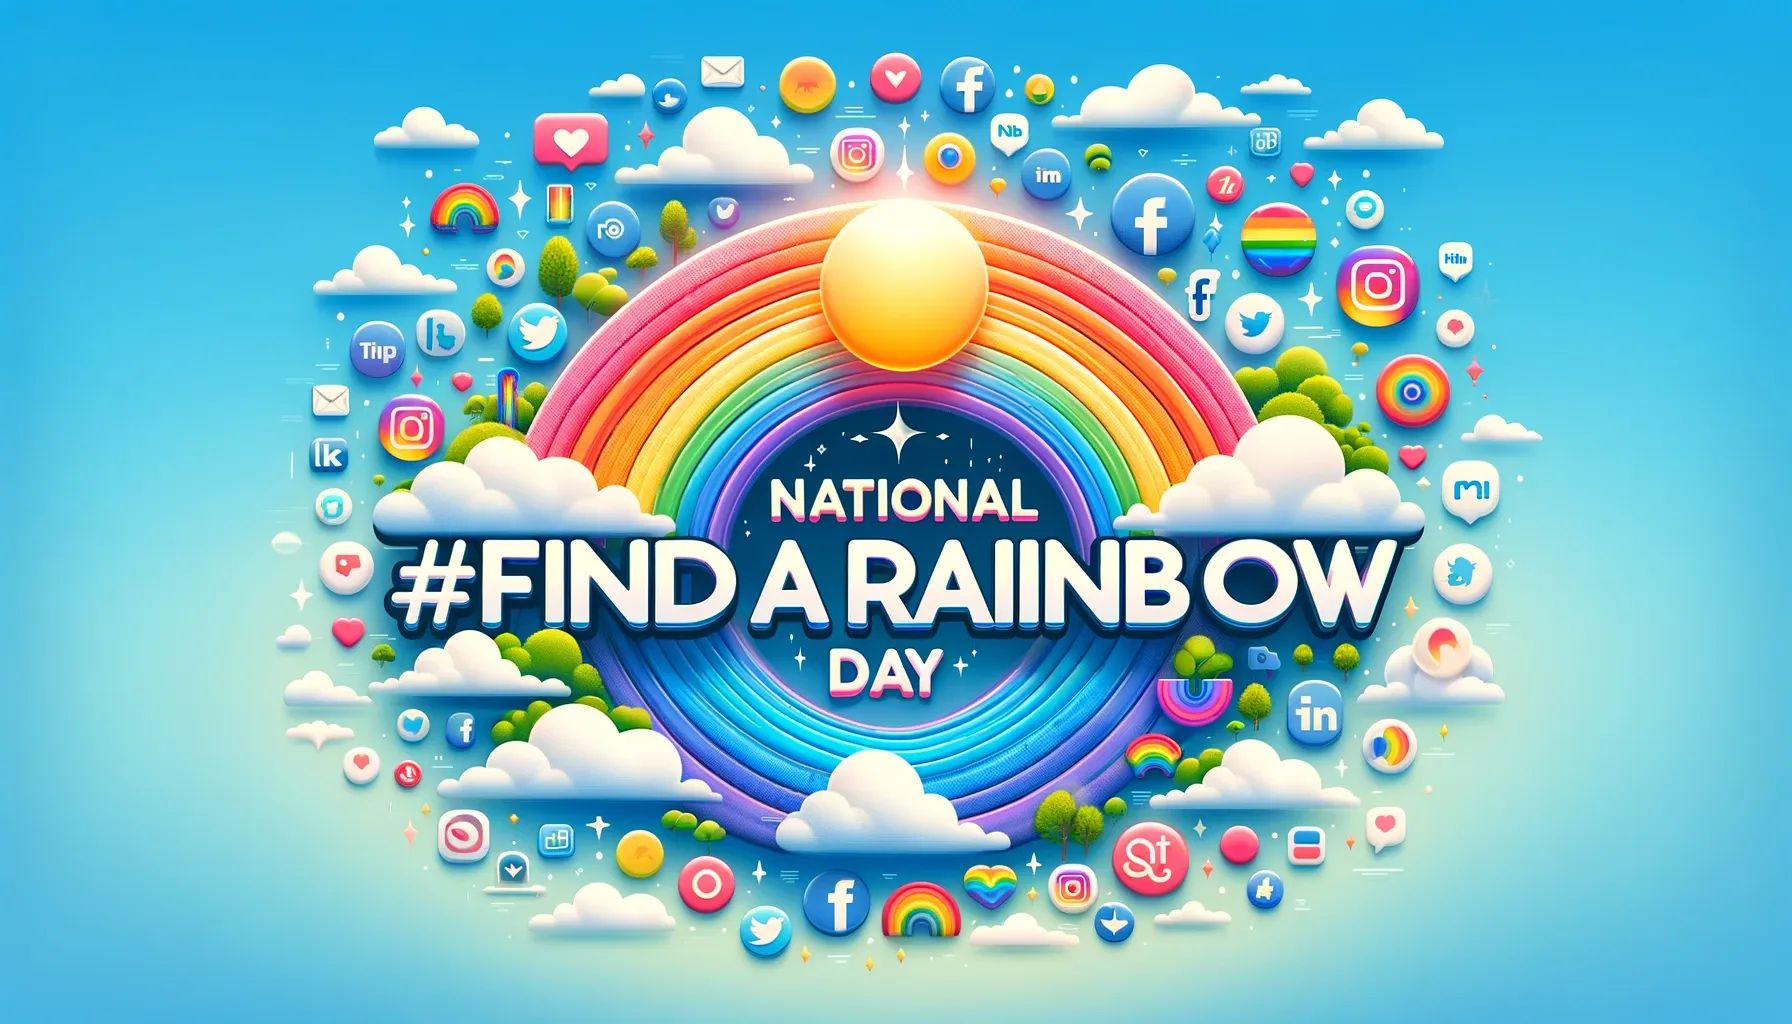 Popular Hashtags for National Find a Rainbow Day